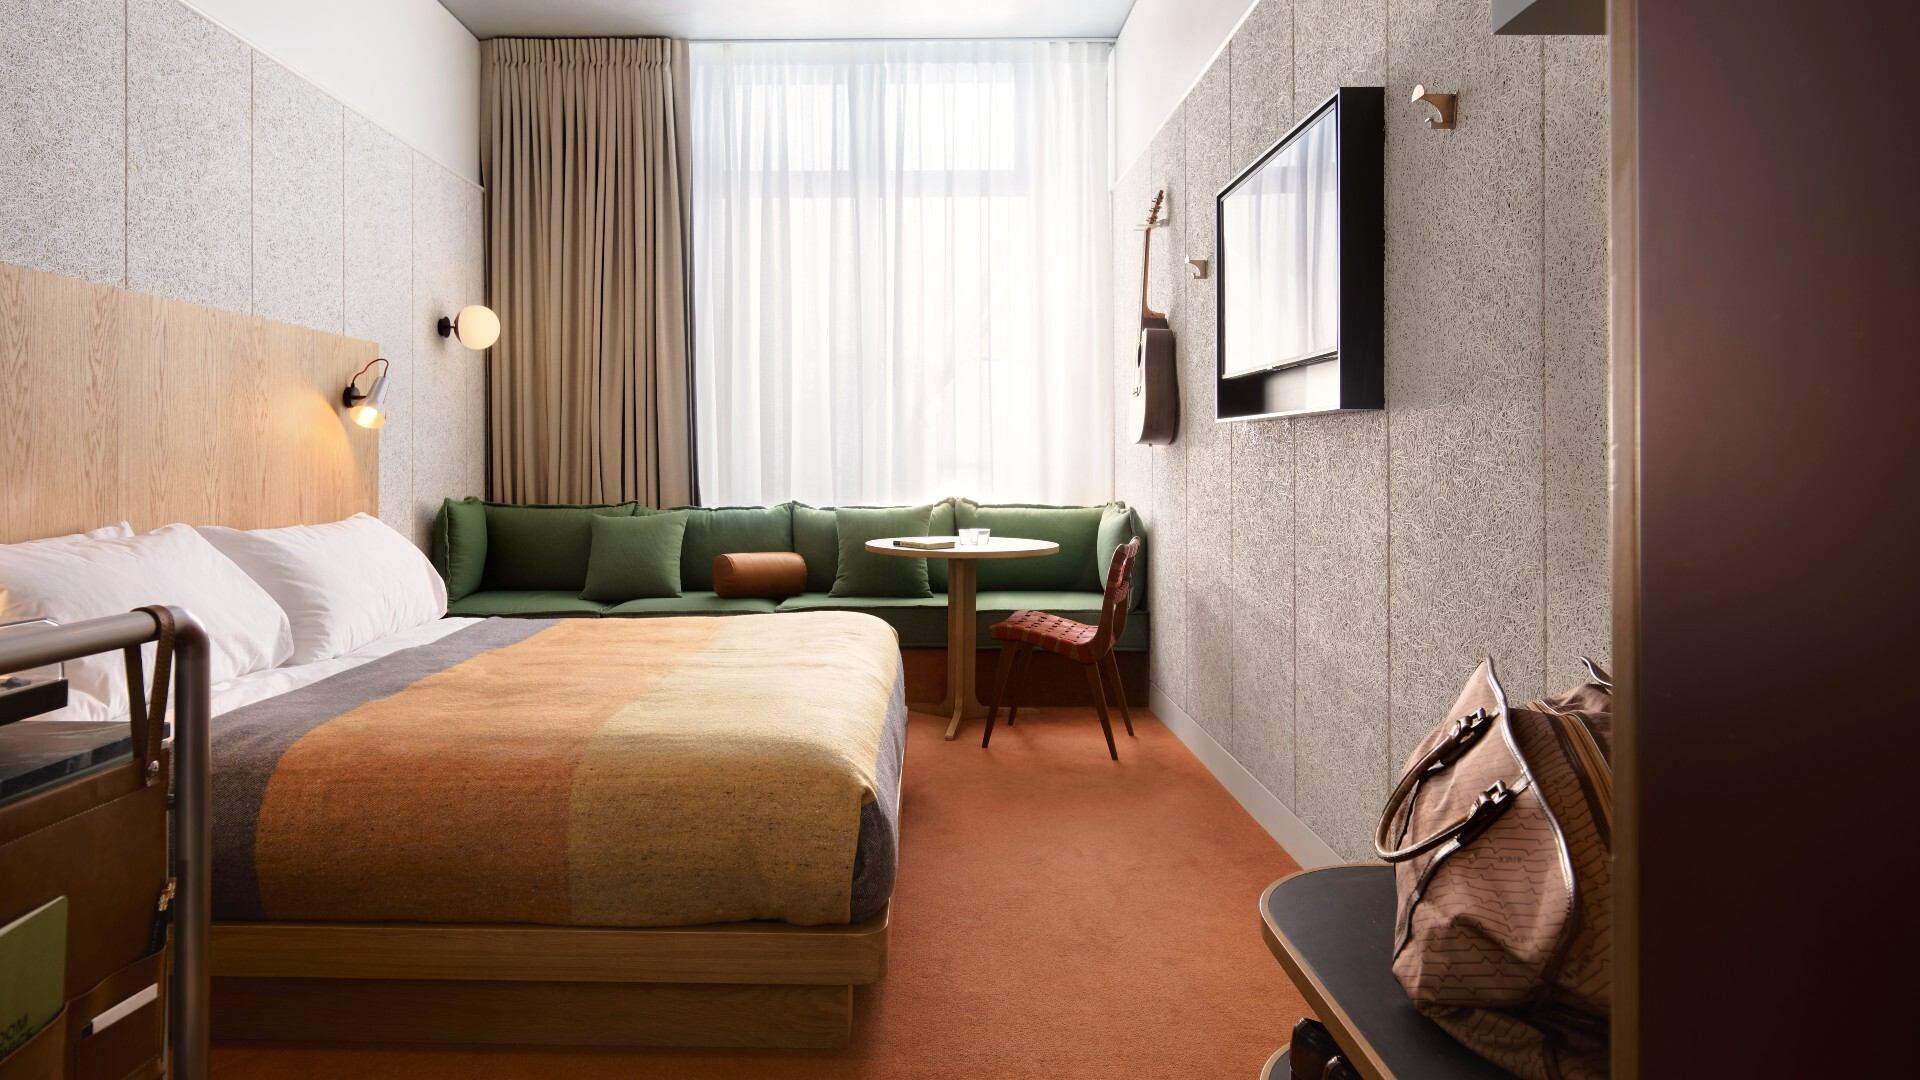 Preview: Australia's First Ever Ace Hotel Looks Predictably Sleek as Hell